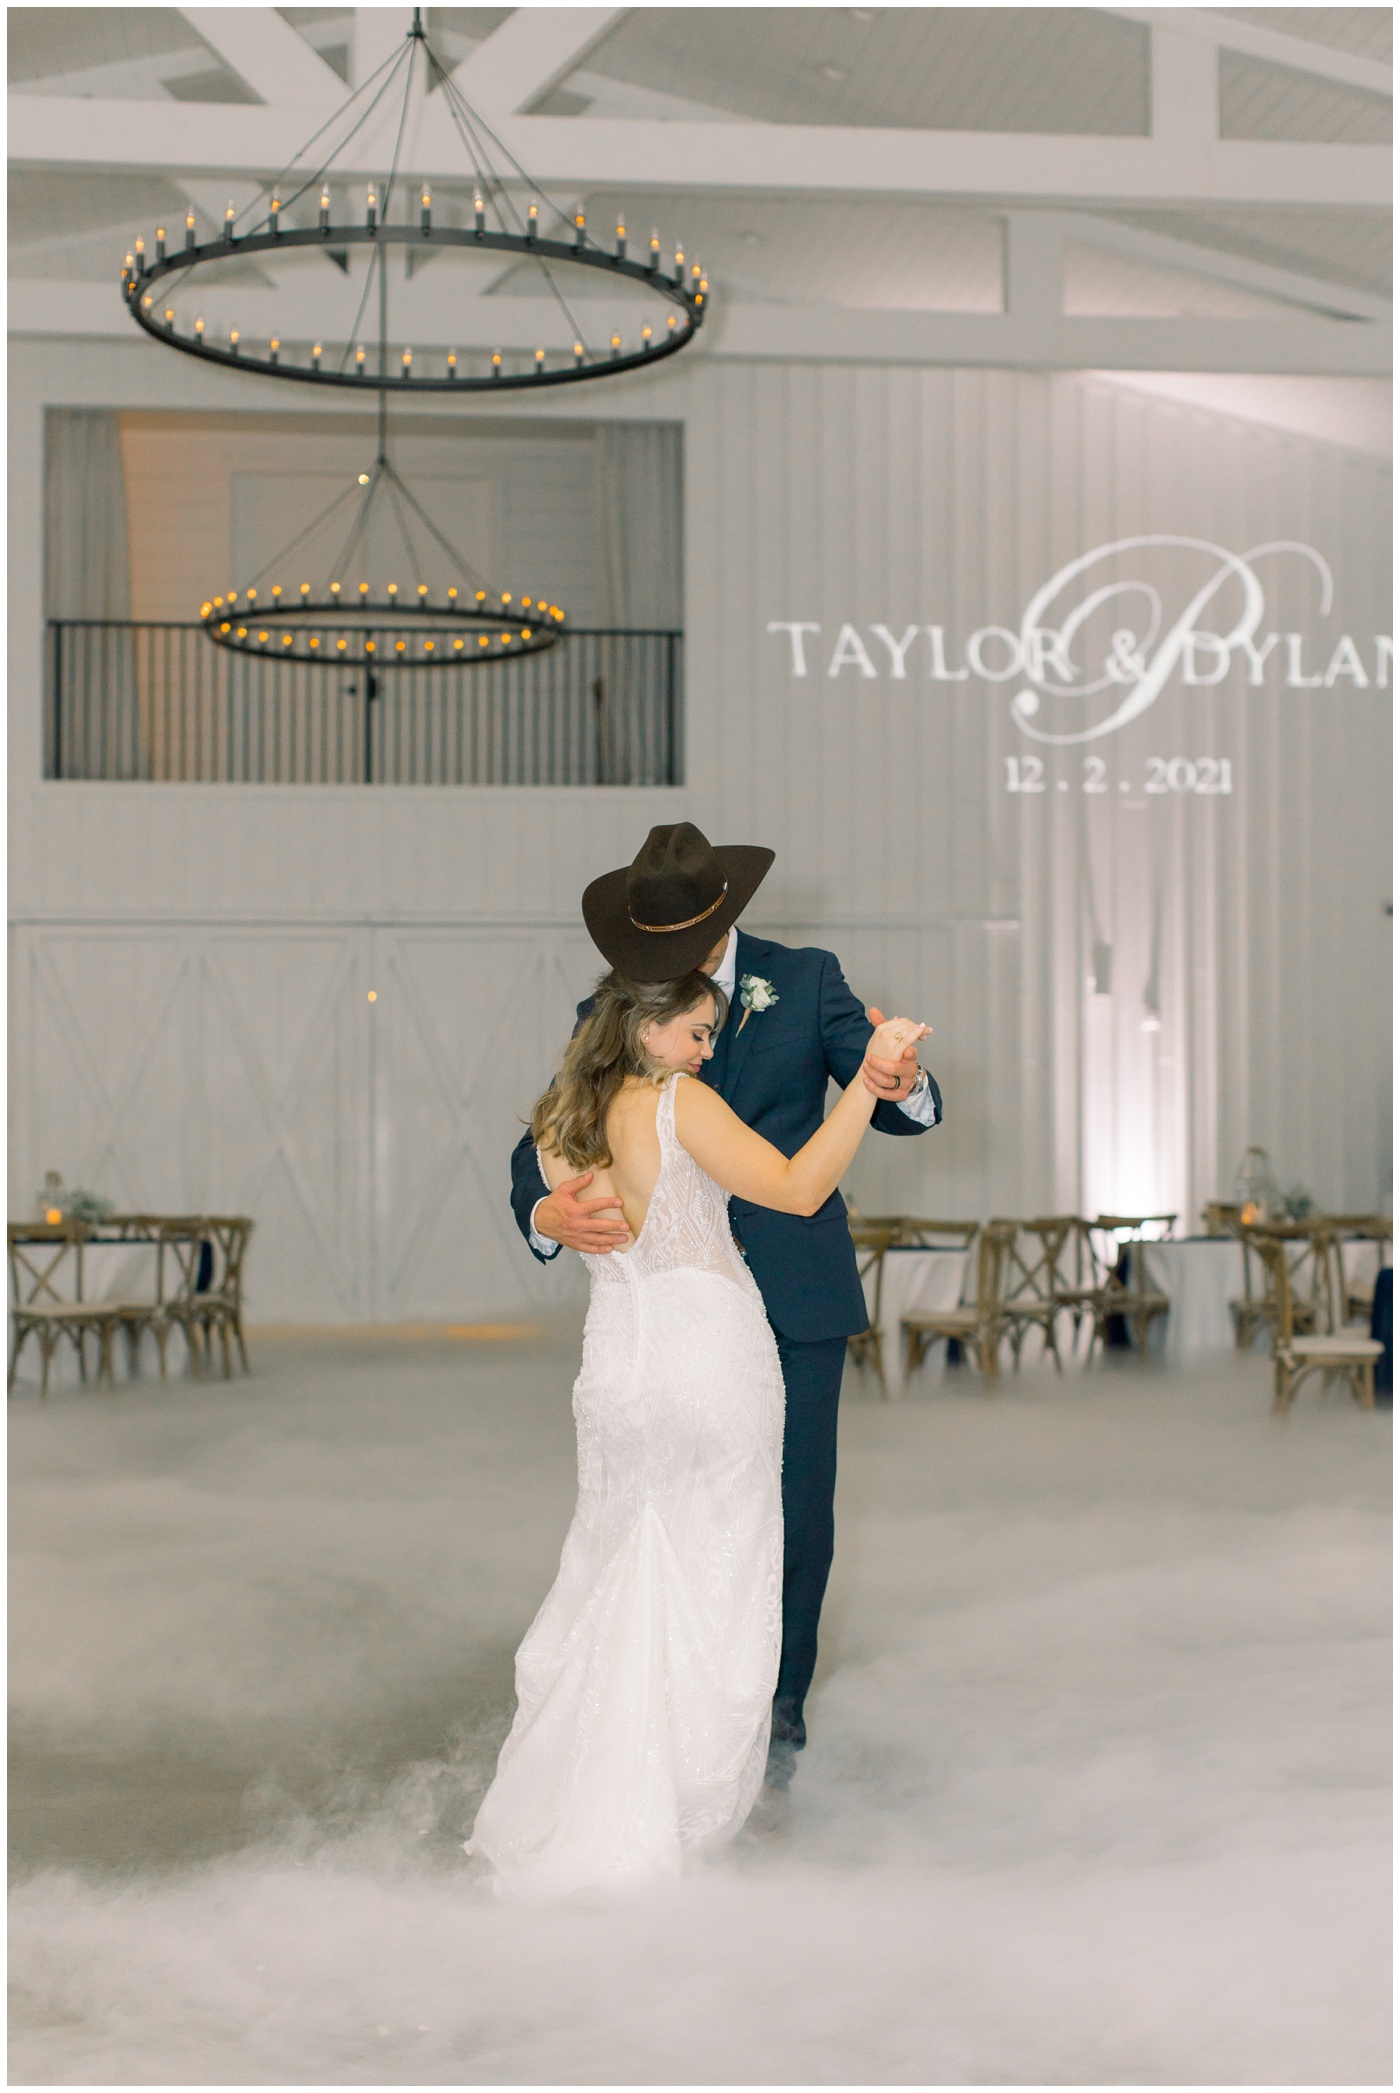 the bride and groom smile sweetly as they share a private dance together at their Texas farmhouse wedding.